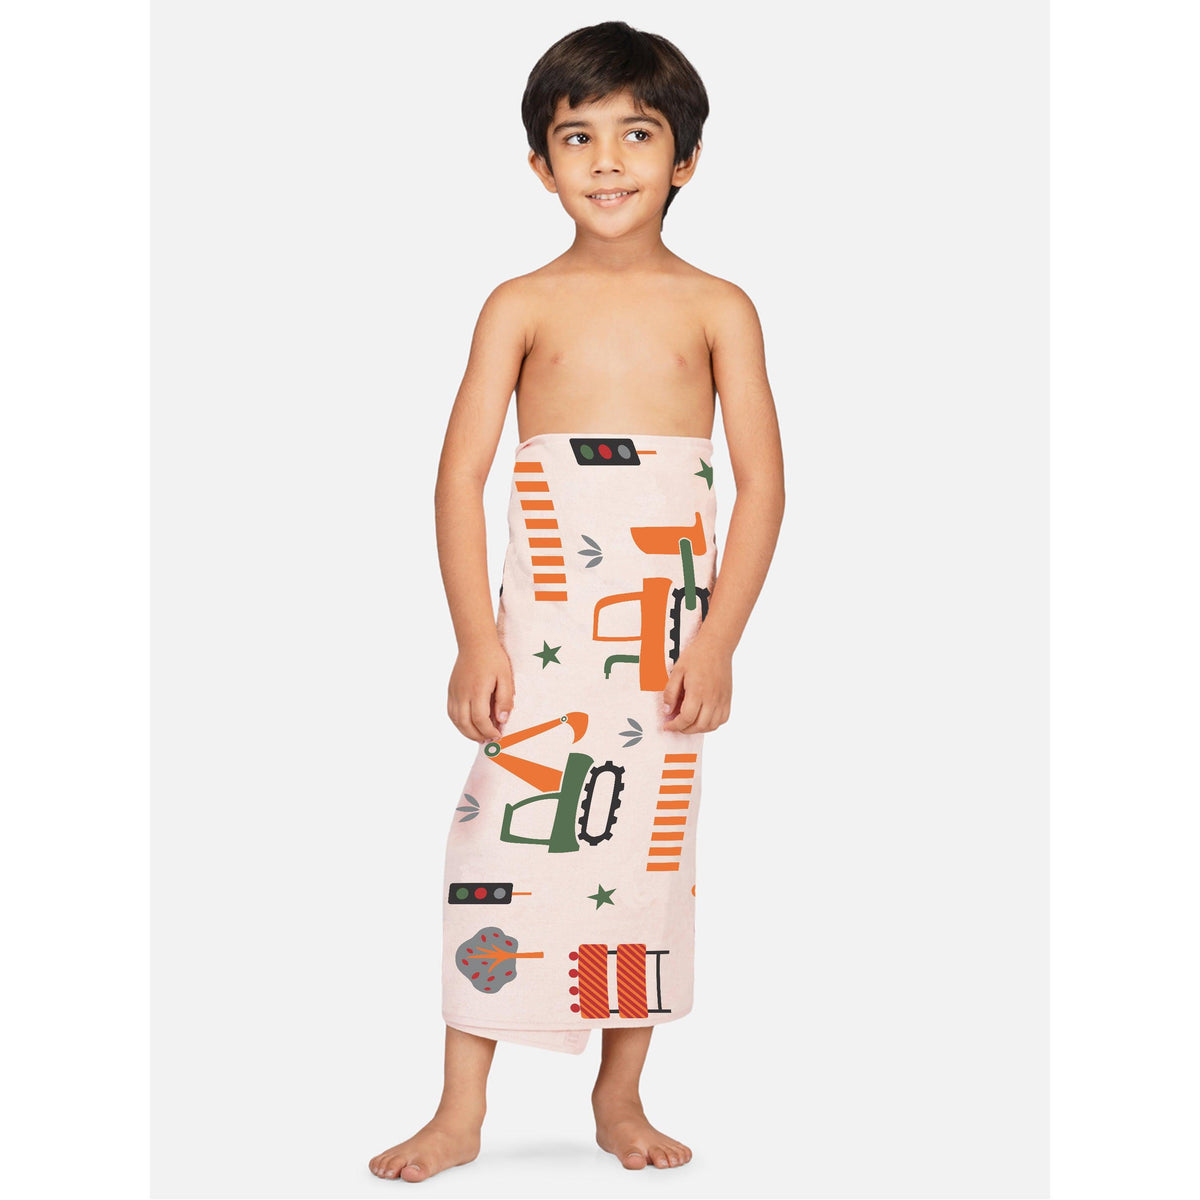 Rangoli Kids Printed Cotton Bath Towel | Anti-Bacterial, Ultra Soft Towels for Girls and Boys